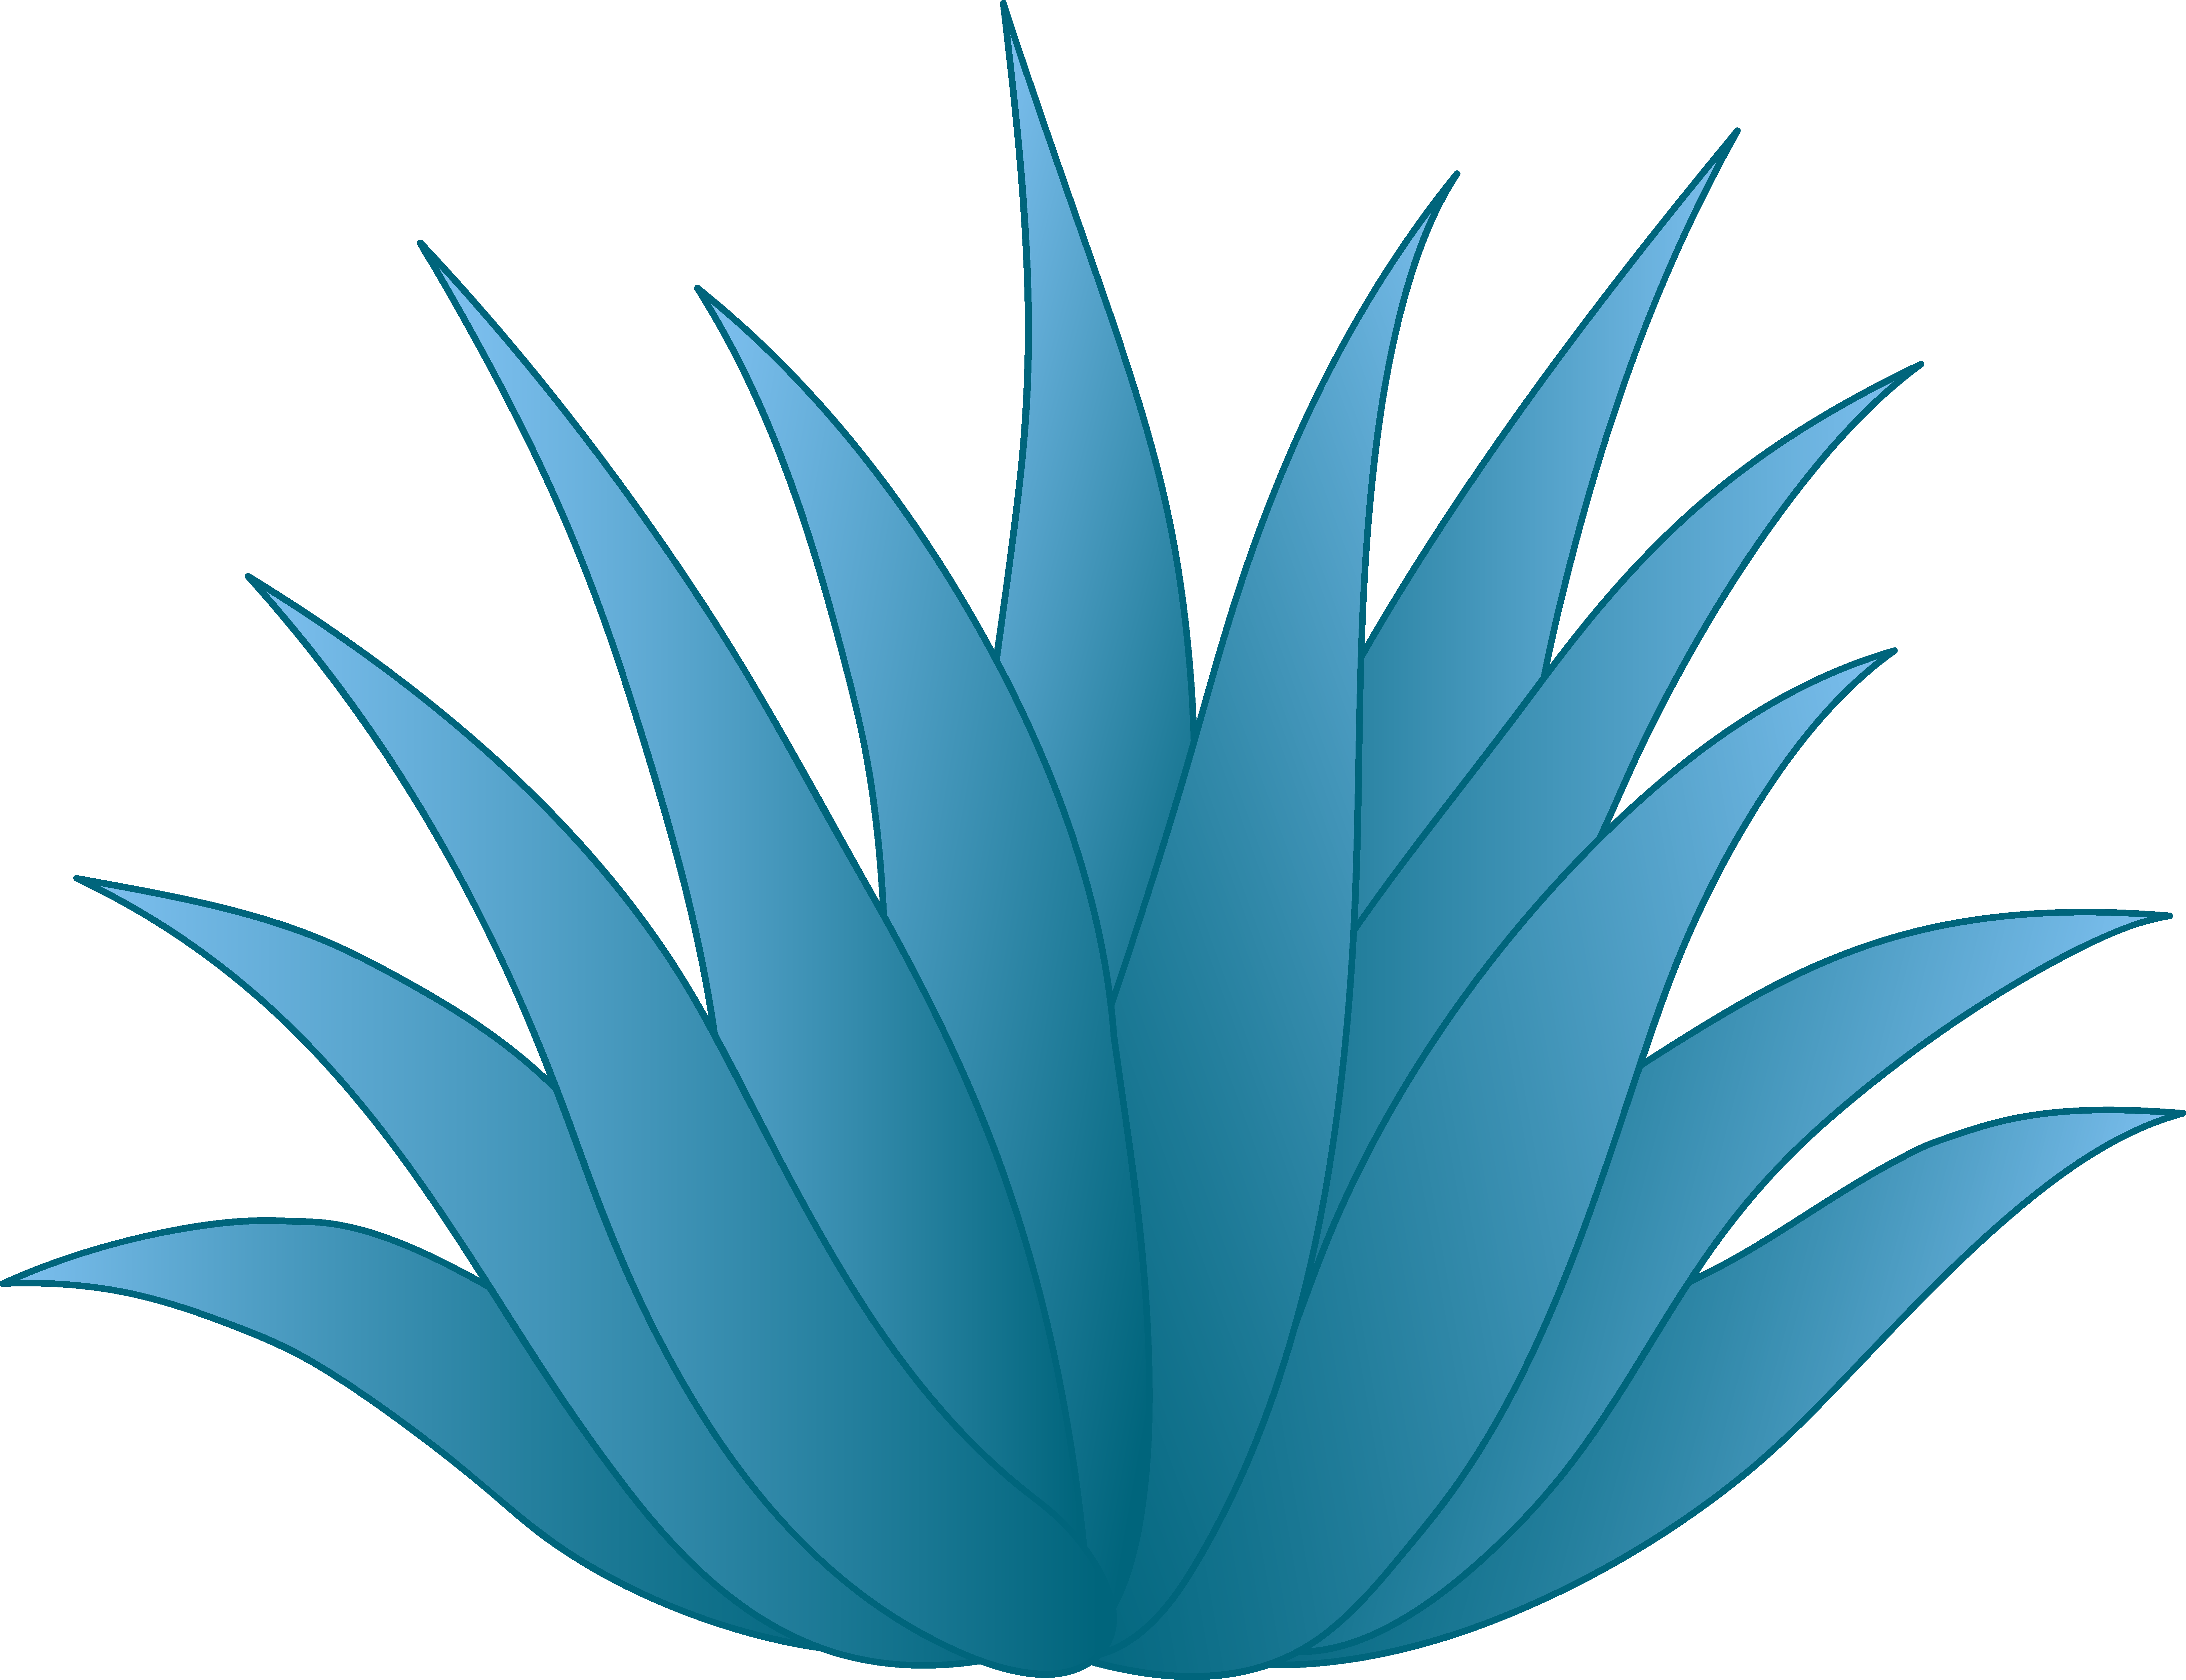 Blue agave plant free. Succulent clipart teal